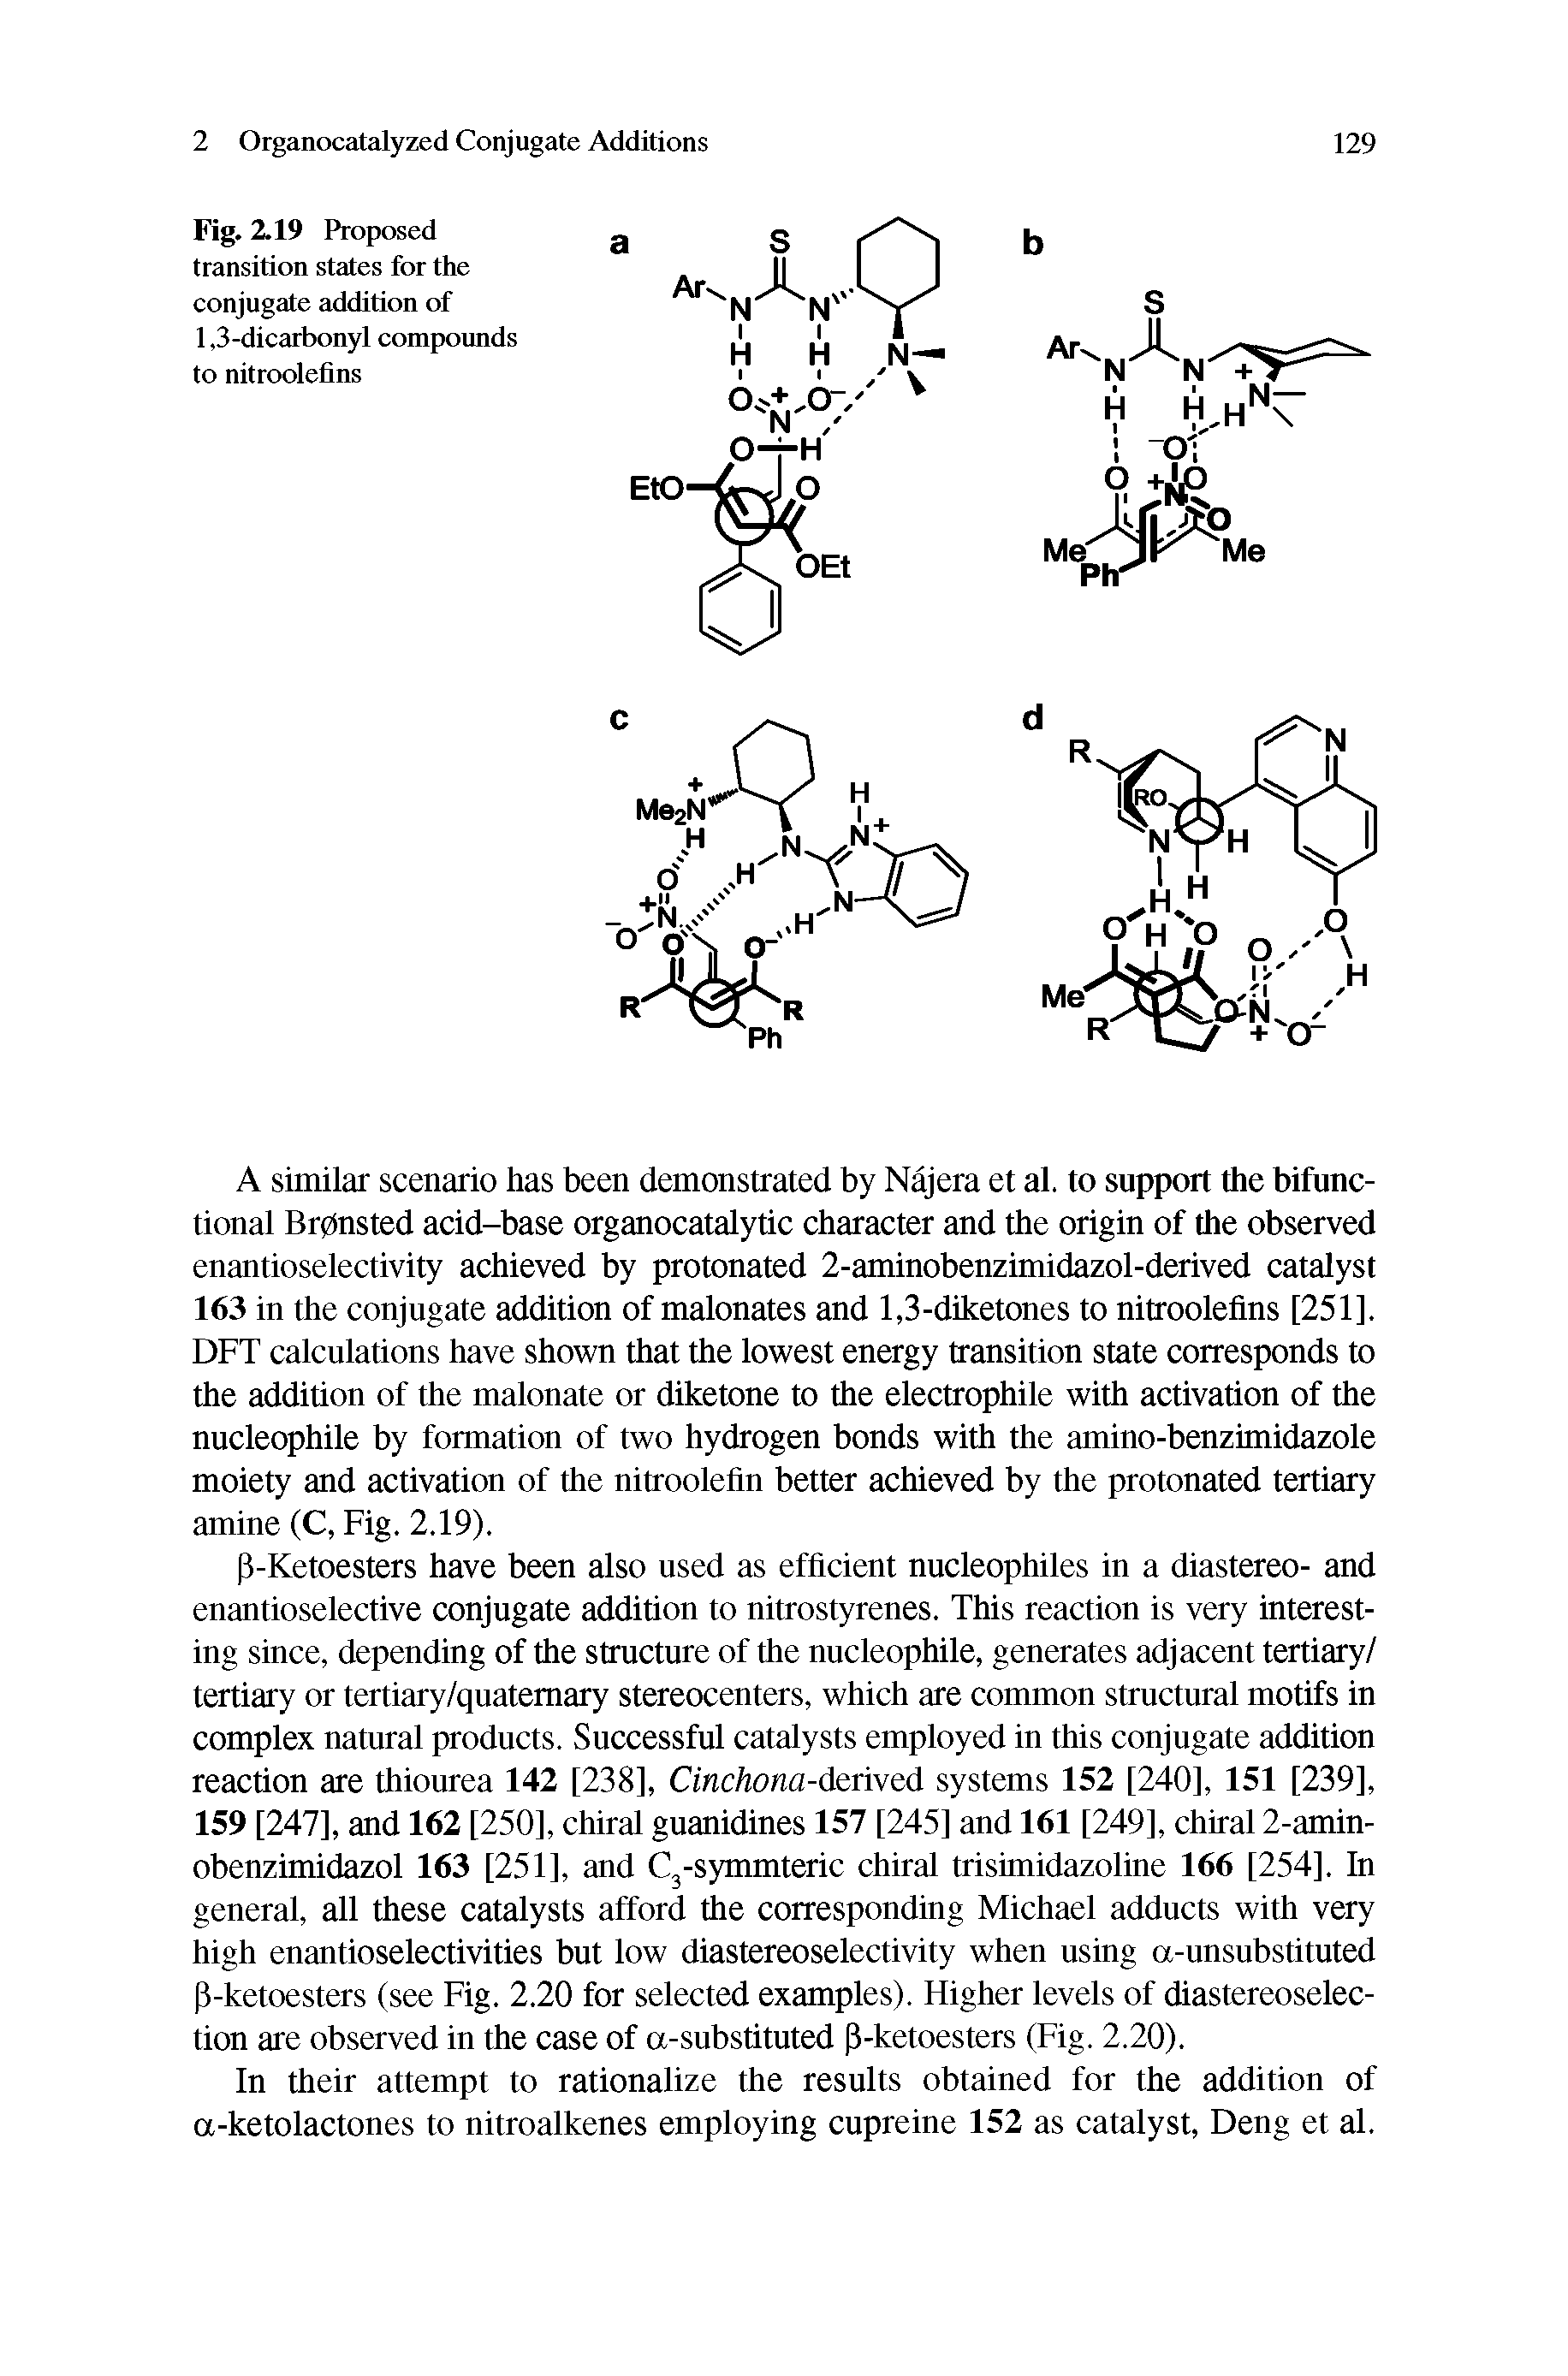 Fig. 2.19 Proposed transition states for the conjugate addition of 1,3-dicarbonyl compounds to nitroolefins...